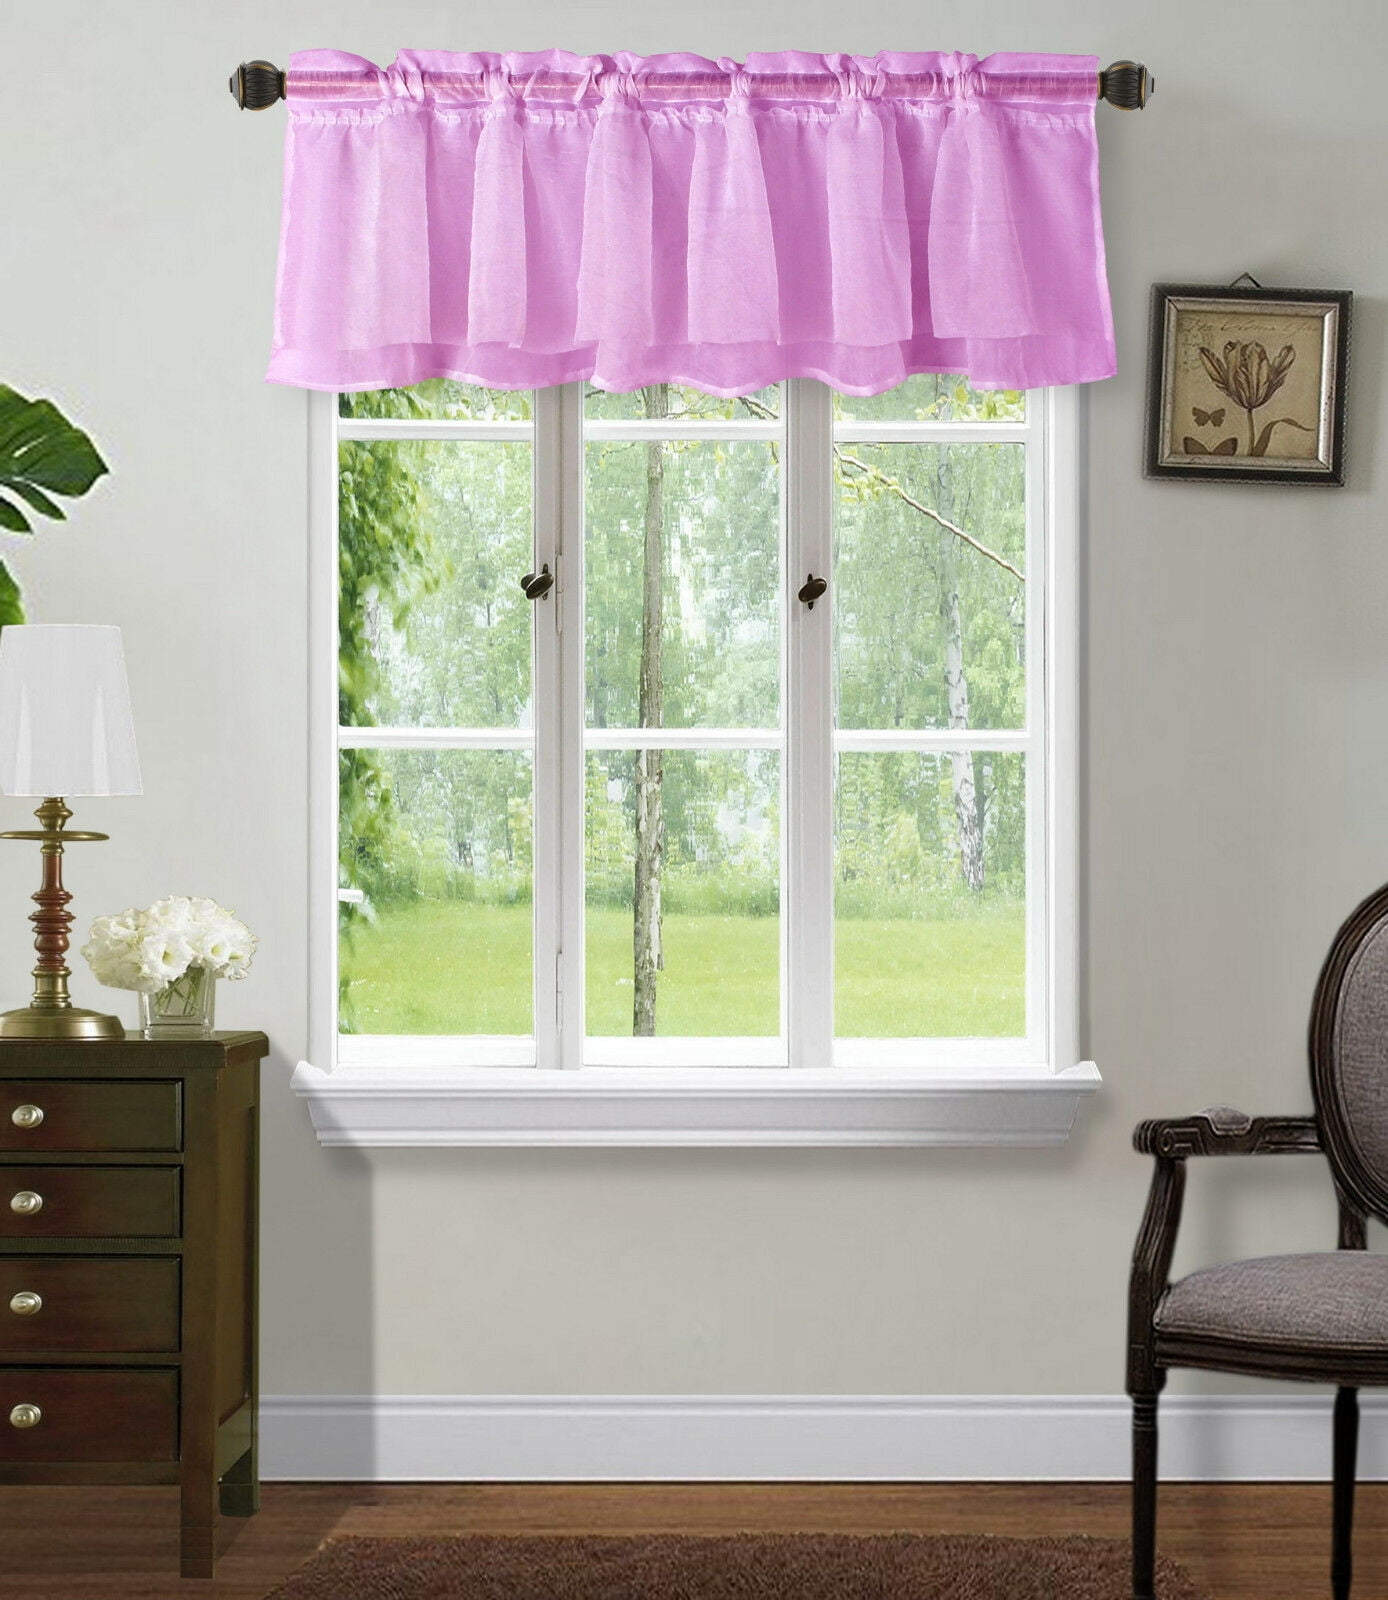 2PC VOILLE SHEER STRAIGHT VALANCE SMALL WINDOW CURTAIN TOPPER SHORTH PANEL 18" 